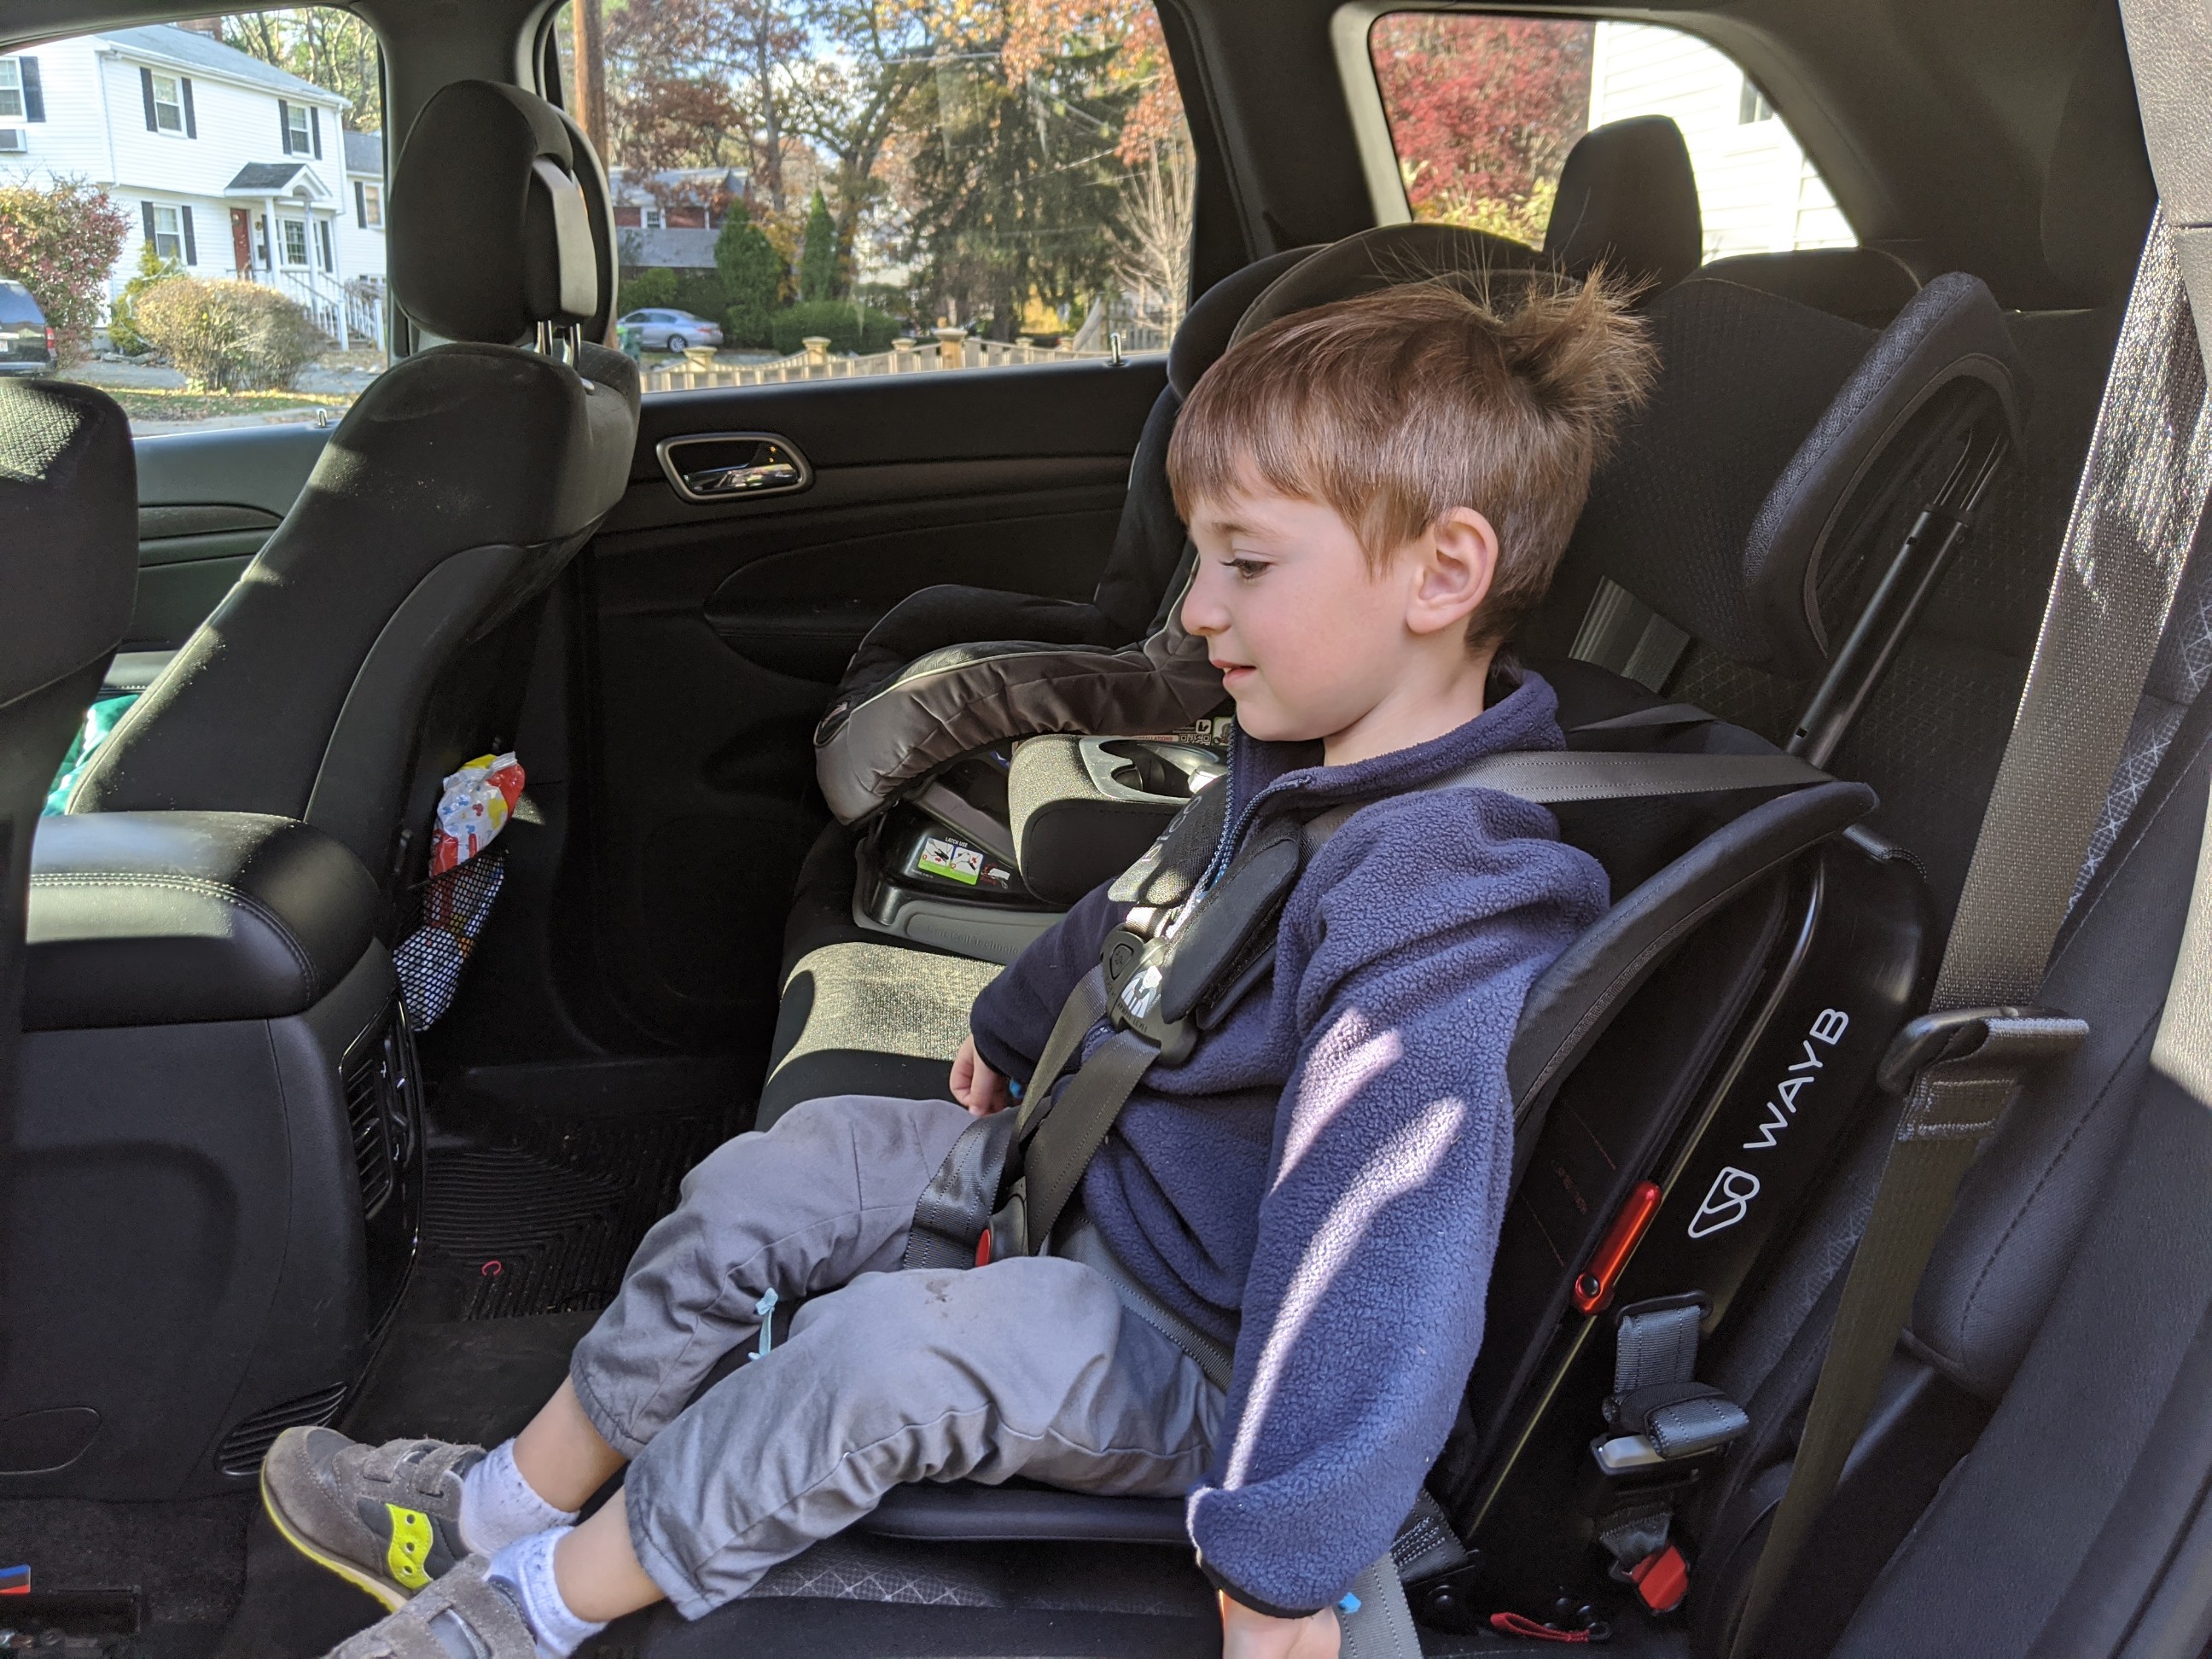 WAYB Pico car seat is the best car seat for travel and best car seat for kids